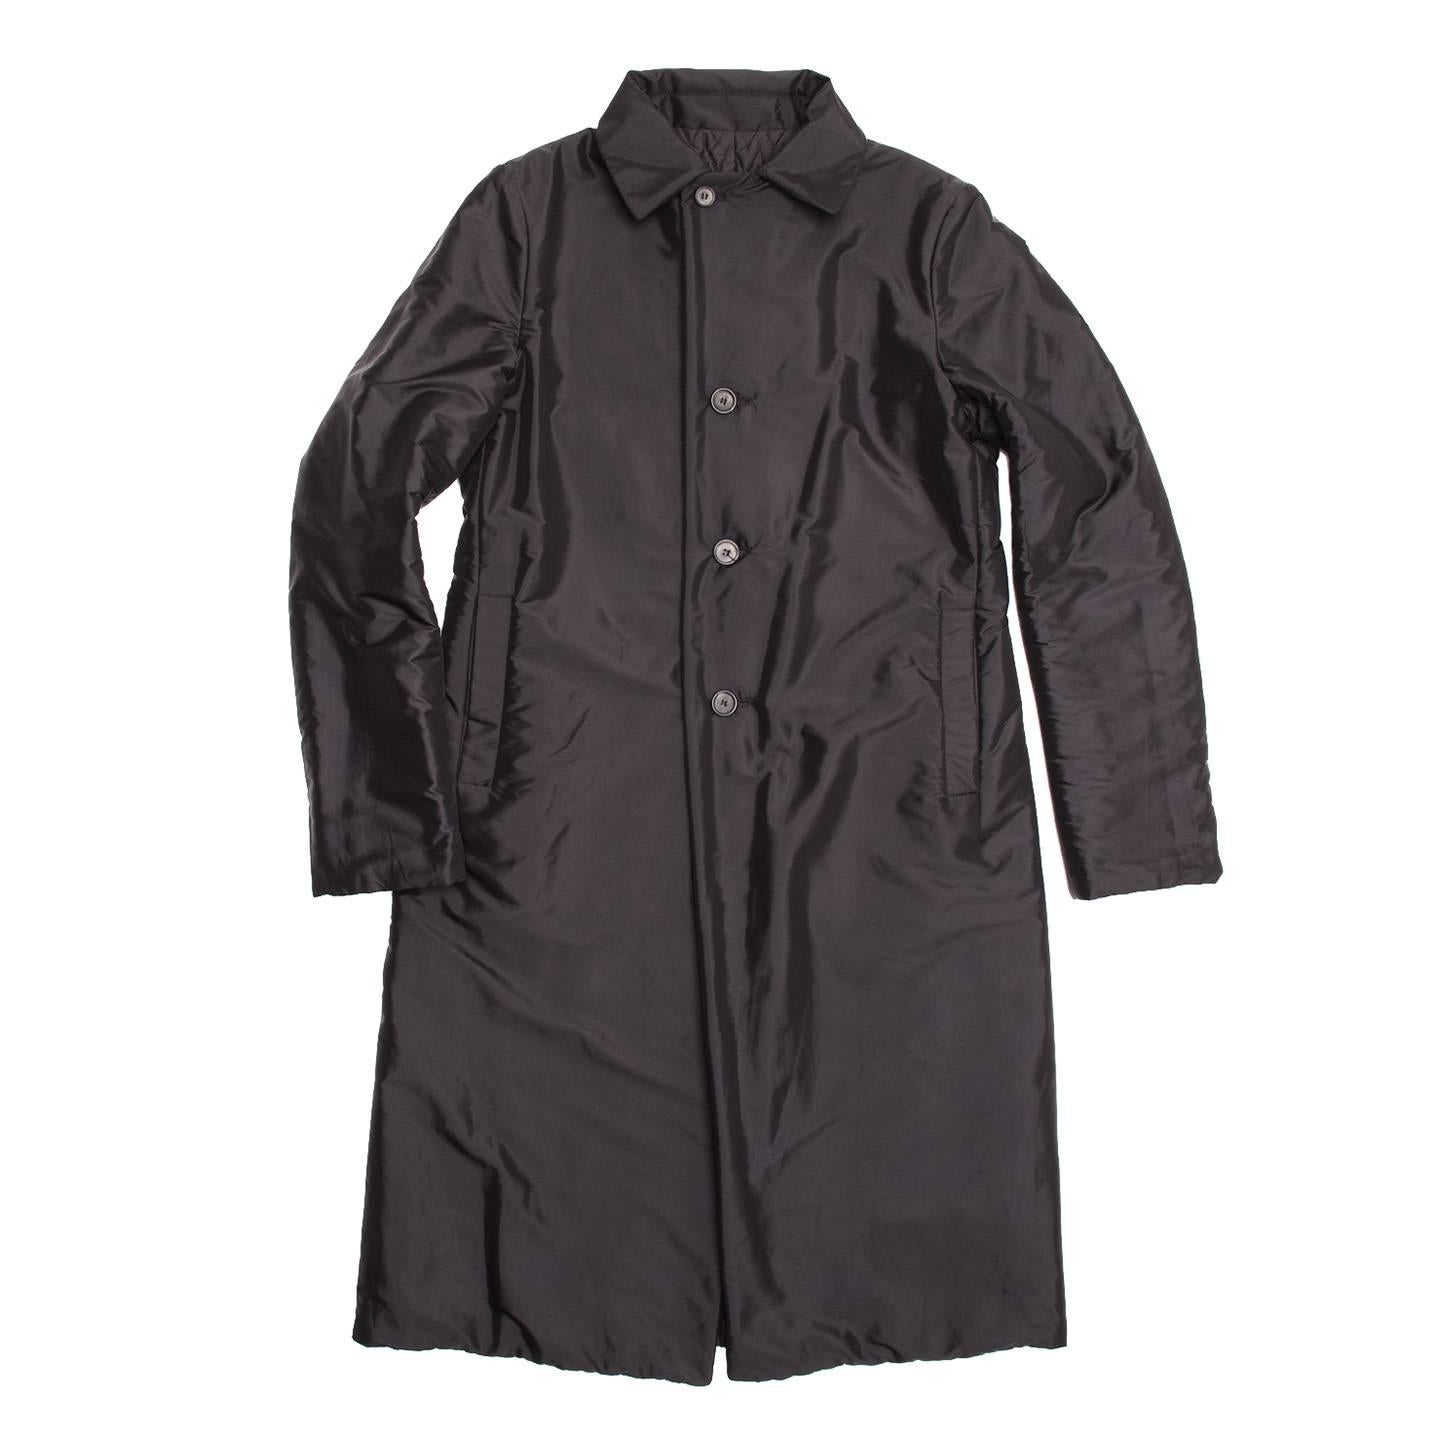 Jil Sander Black Reversible Quilted Coat In Excellent Condition For Sale In Brooklyn, NY